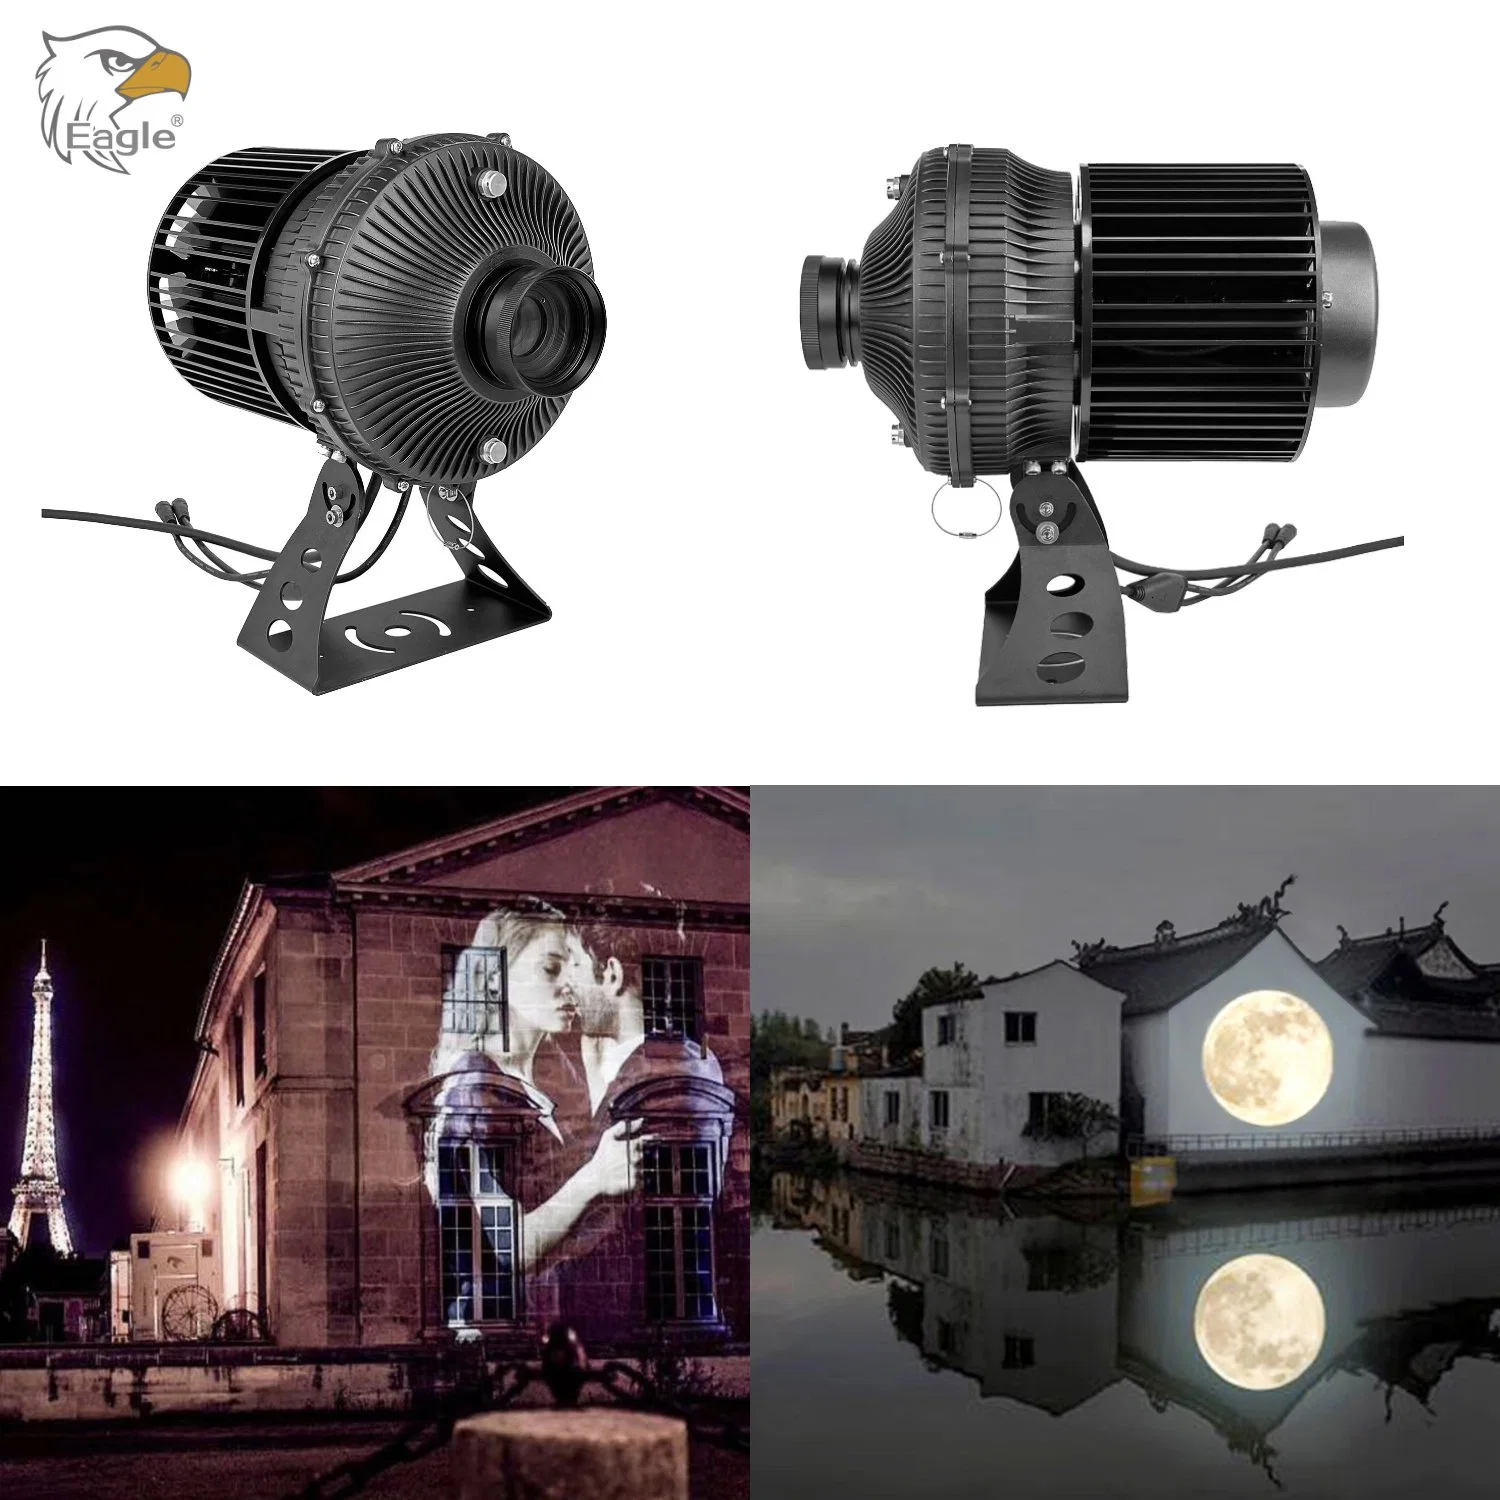 LED 220W Outdoor Waterproof Multi Image Automatic Cycle Projection Landscape Lighting Gobo Projector Light